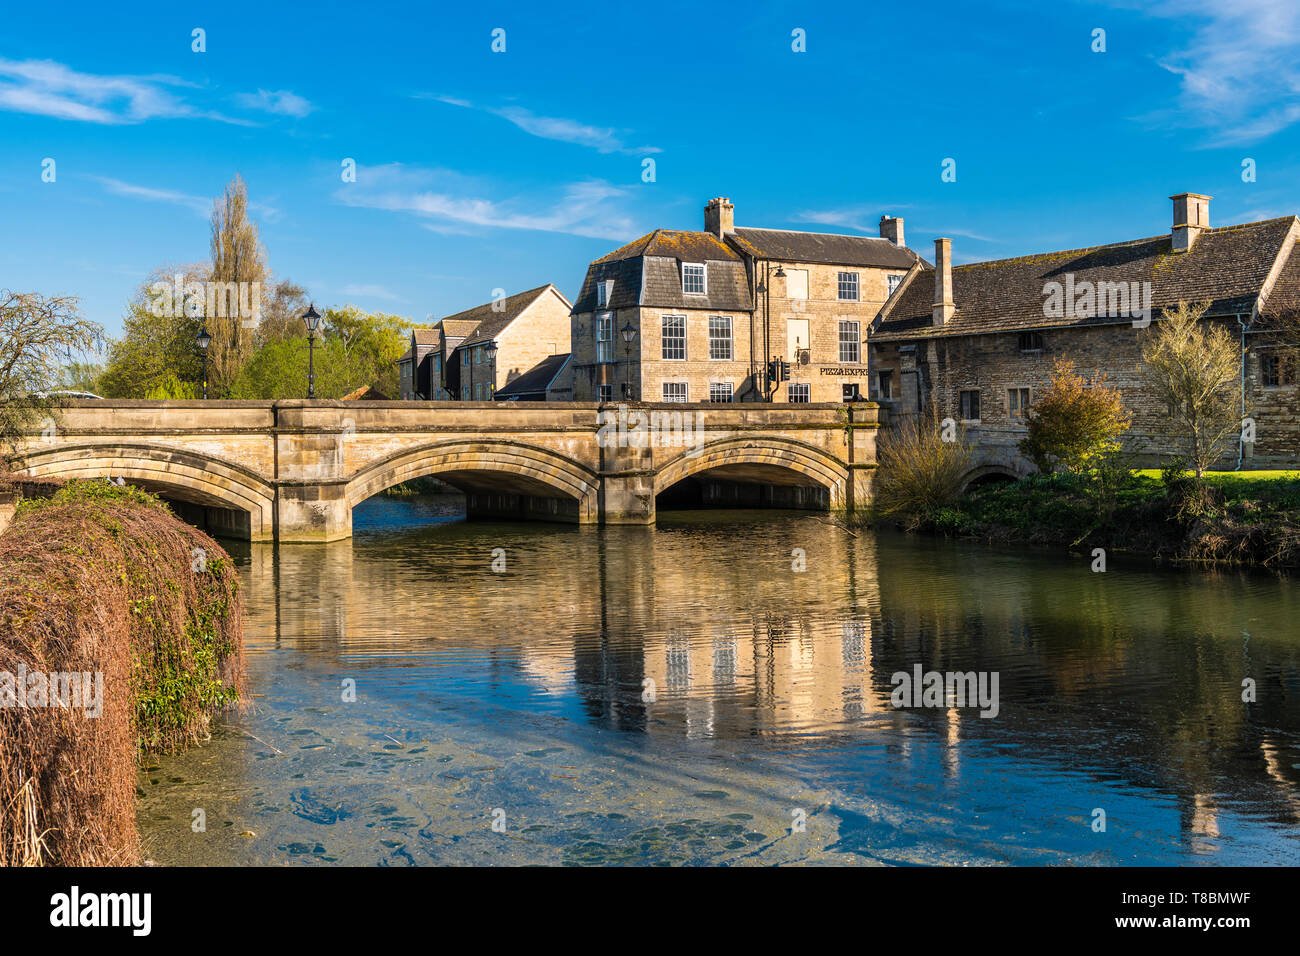 The River Welland flowing through the town of Stamford, Lincolnshire, England Stock Photo